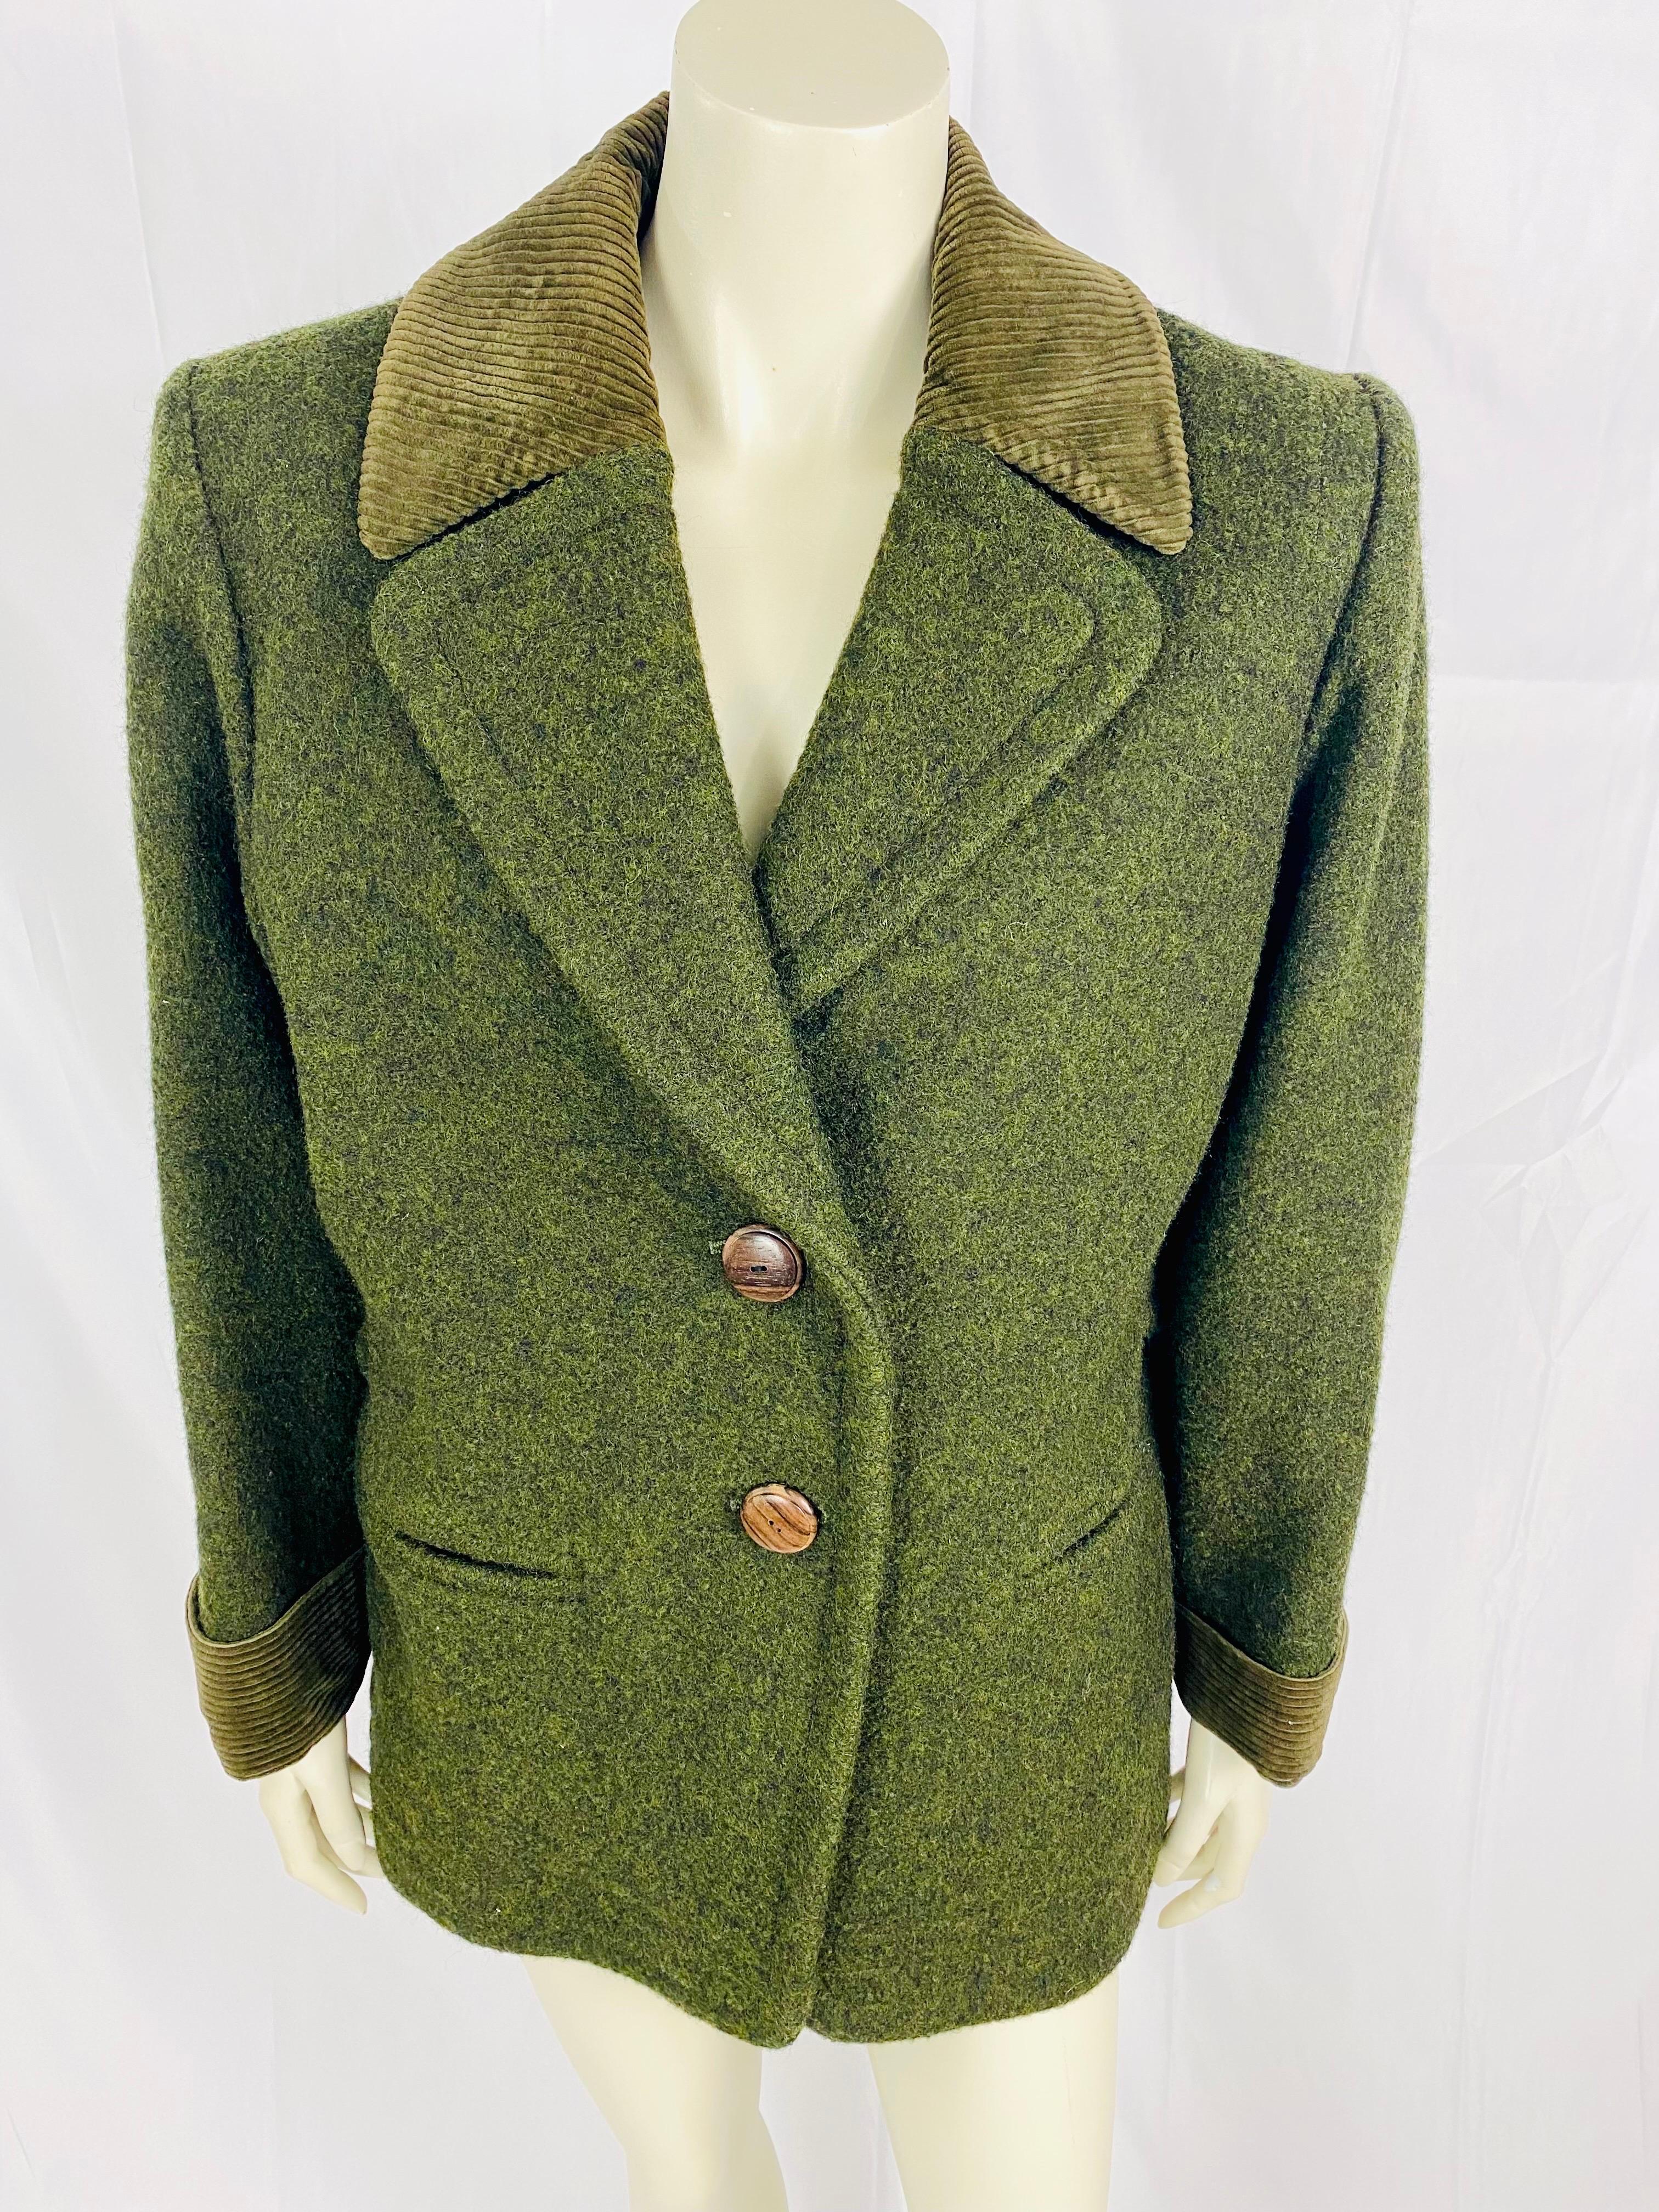 Vintage winter jacket by Yves Saint Laurent Rive gauche circa 1970,
Khaki in boiled wool, thick and very warm, the cuffs of the sleeves and the collar are in corduroy to the color.
Piped pockets.
Buttoned tabs that slightly mark the